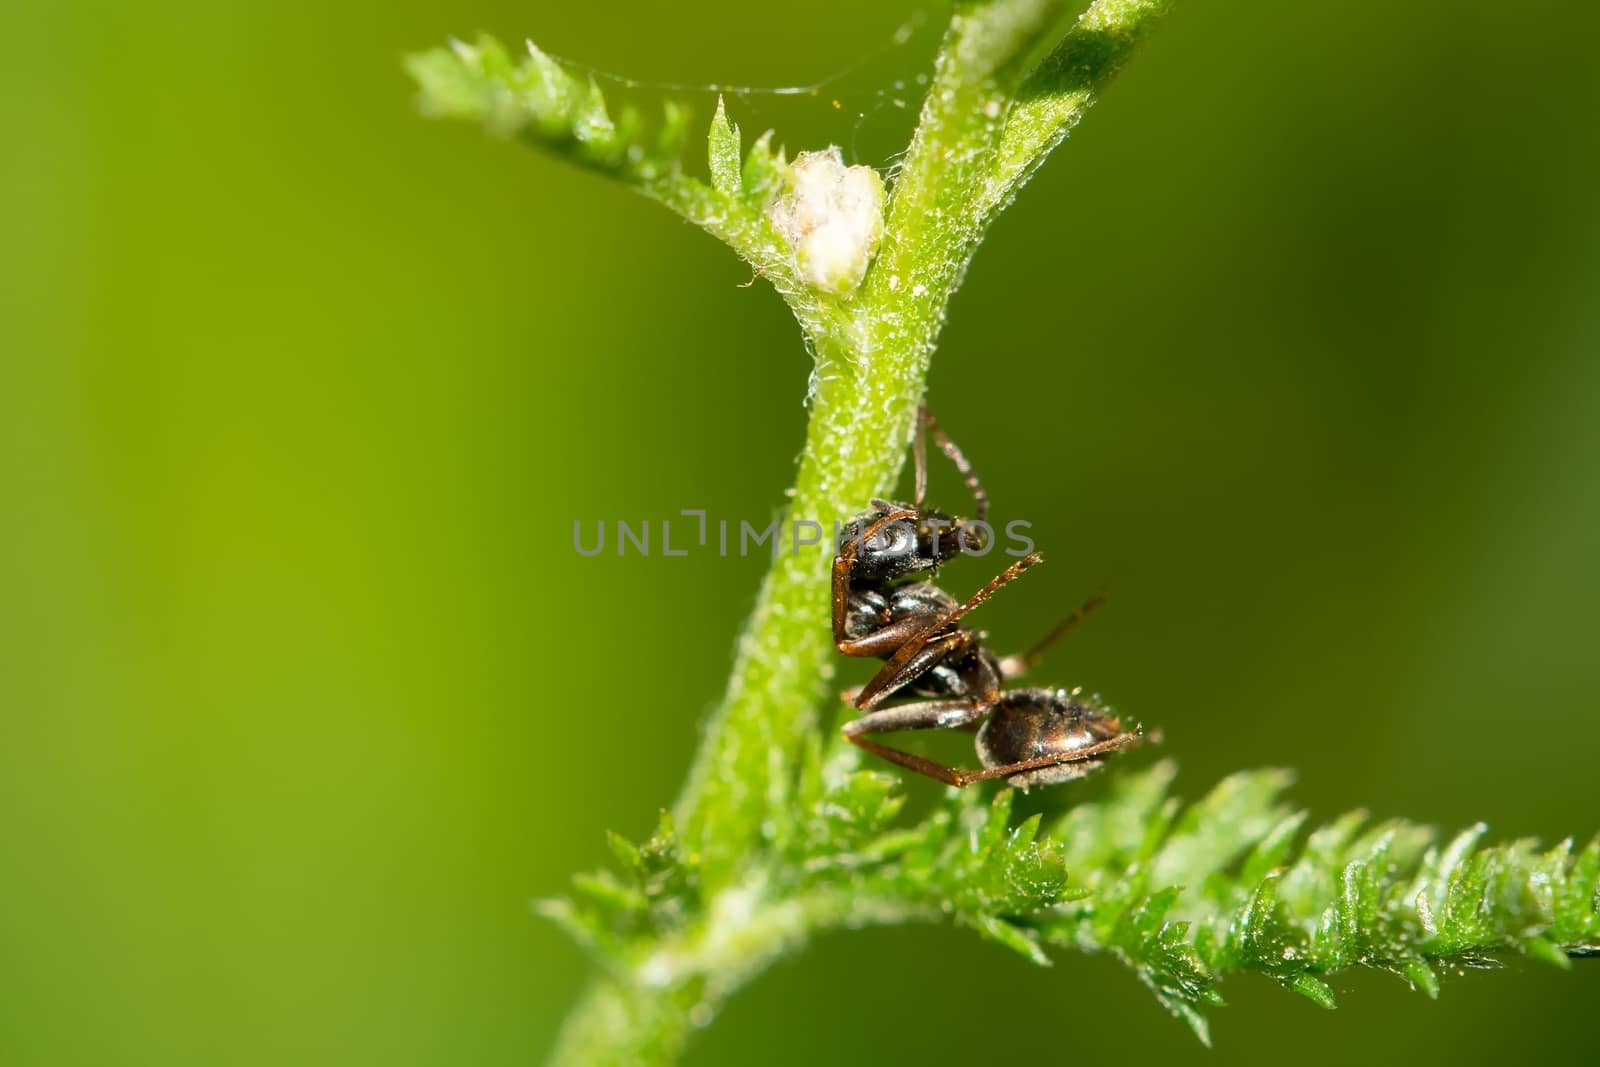 Small black ant resting in the grass.